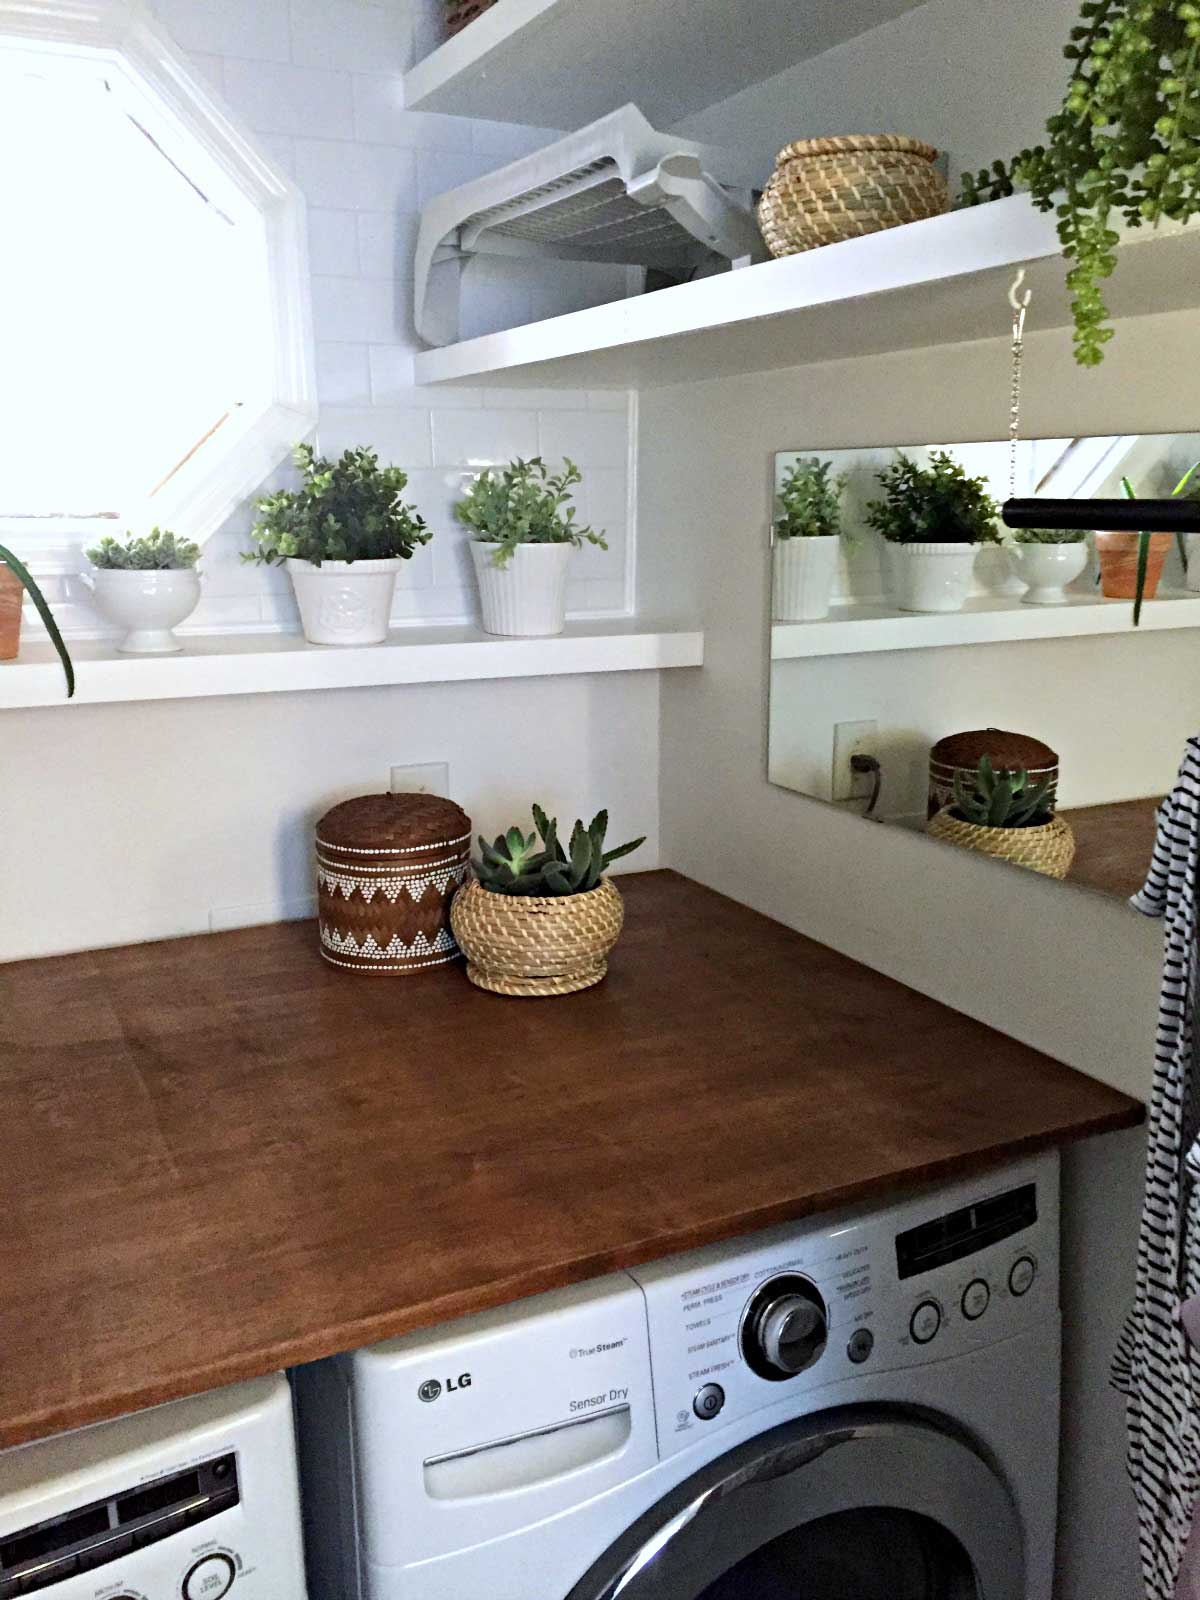 https://www.uglyducklinghouse.com/wp-content/uploads/2017/01/laundry-room-right-side-without-overhead-light-1.jpg